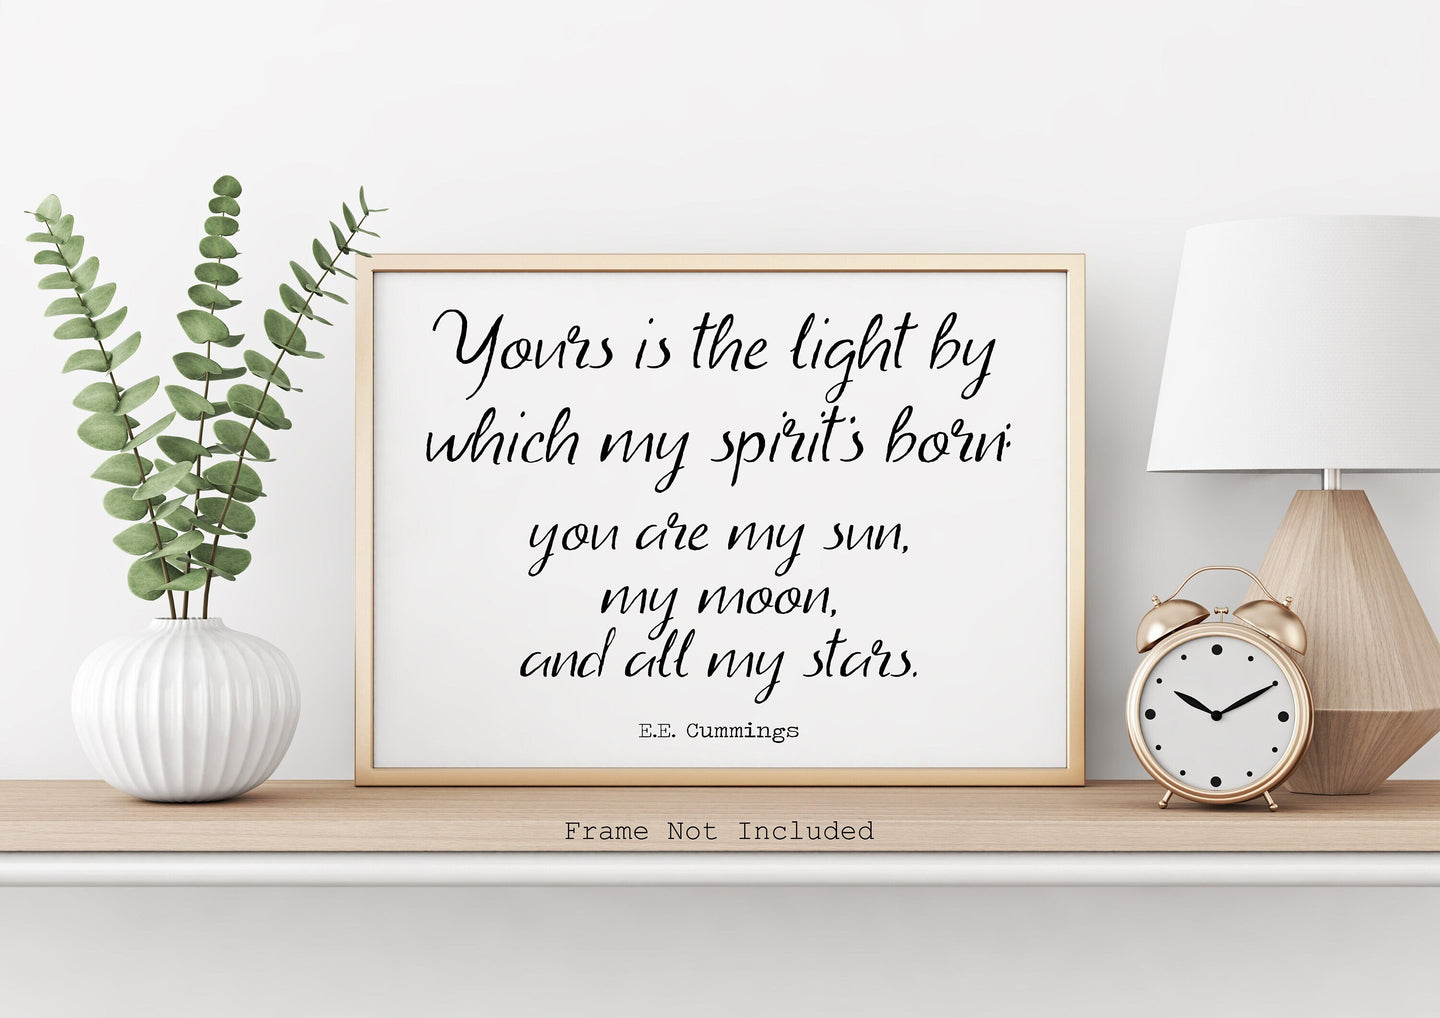 E.E. Cummings quote you are my sun, my moon, and all my stars Art Print Home Decor poetry wall art horizontal wall art UNFRAMED